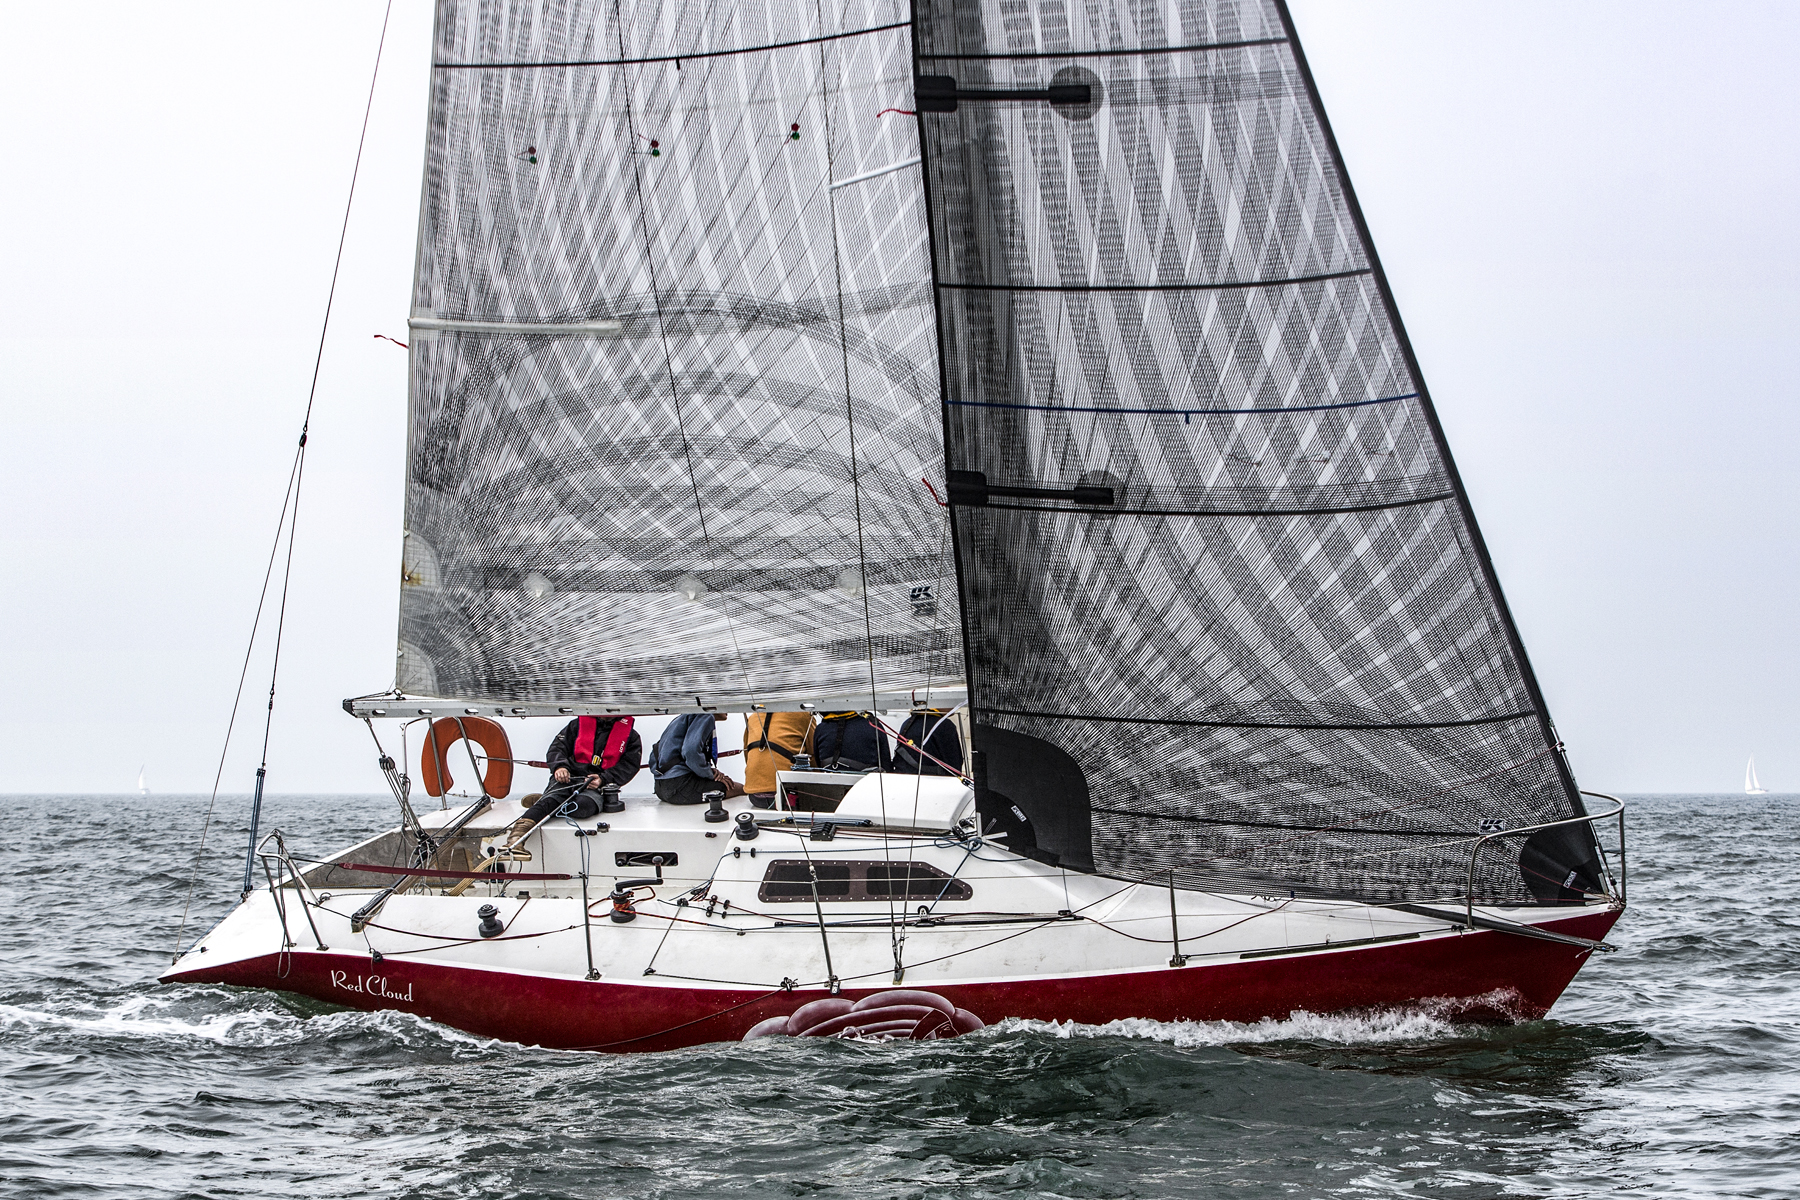 The IOR Half Tonner RED CLOUD with X-Drive carbon sails.